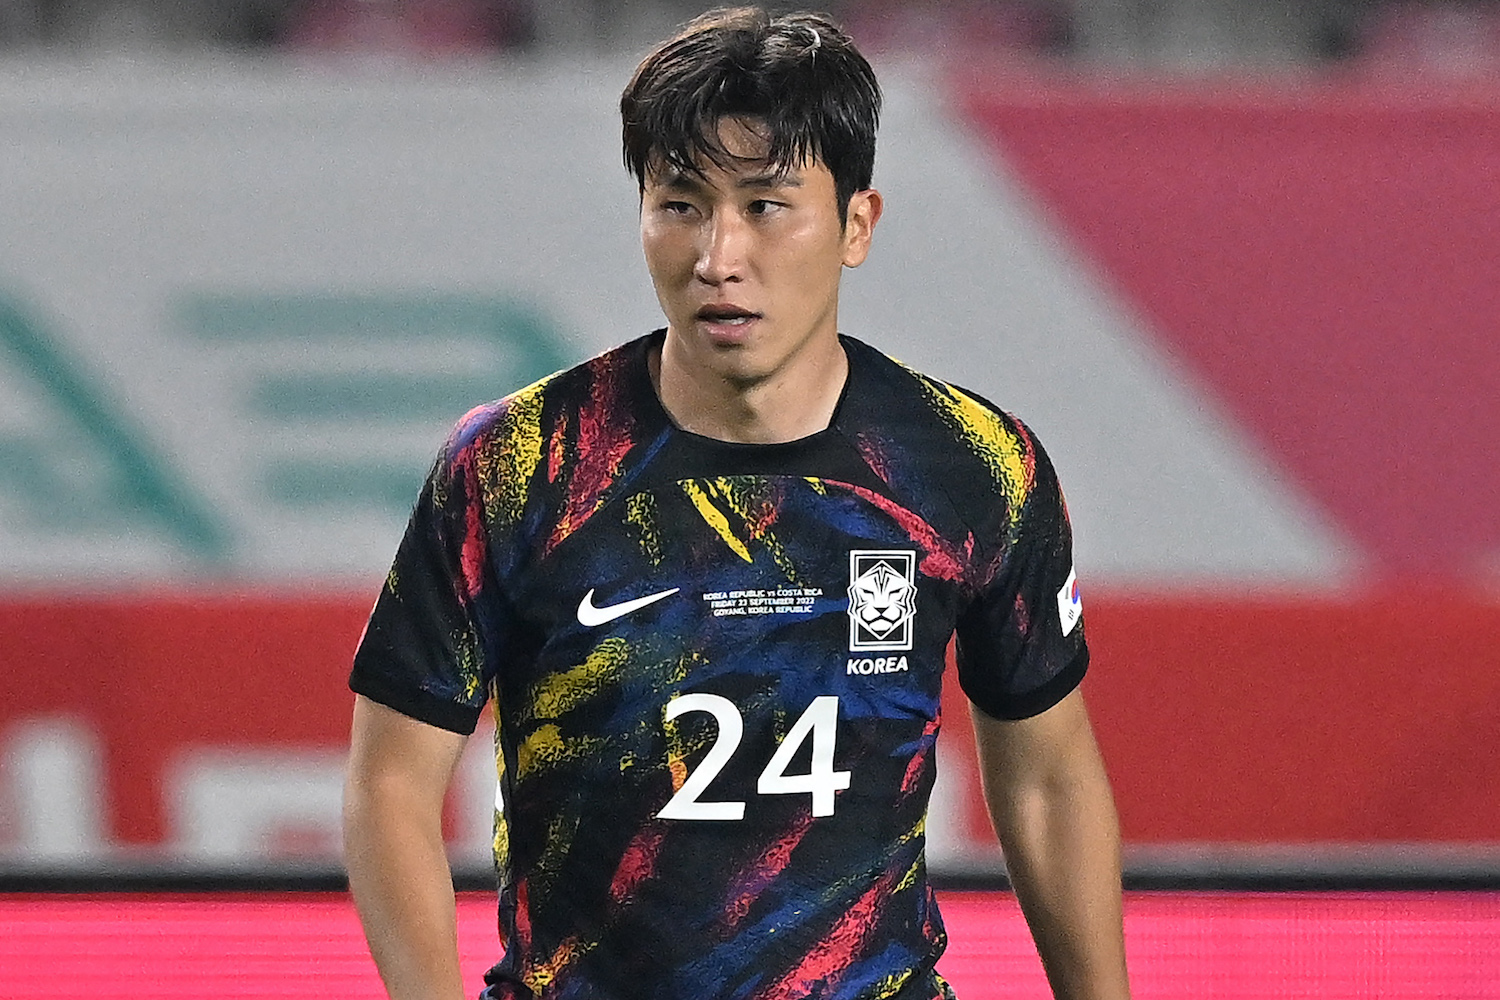 a korean soccer player in a jersey